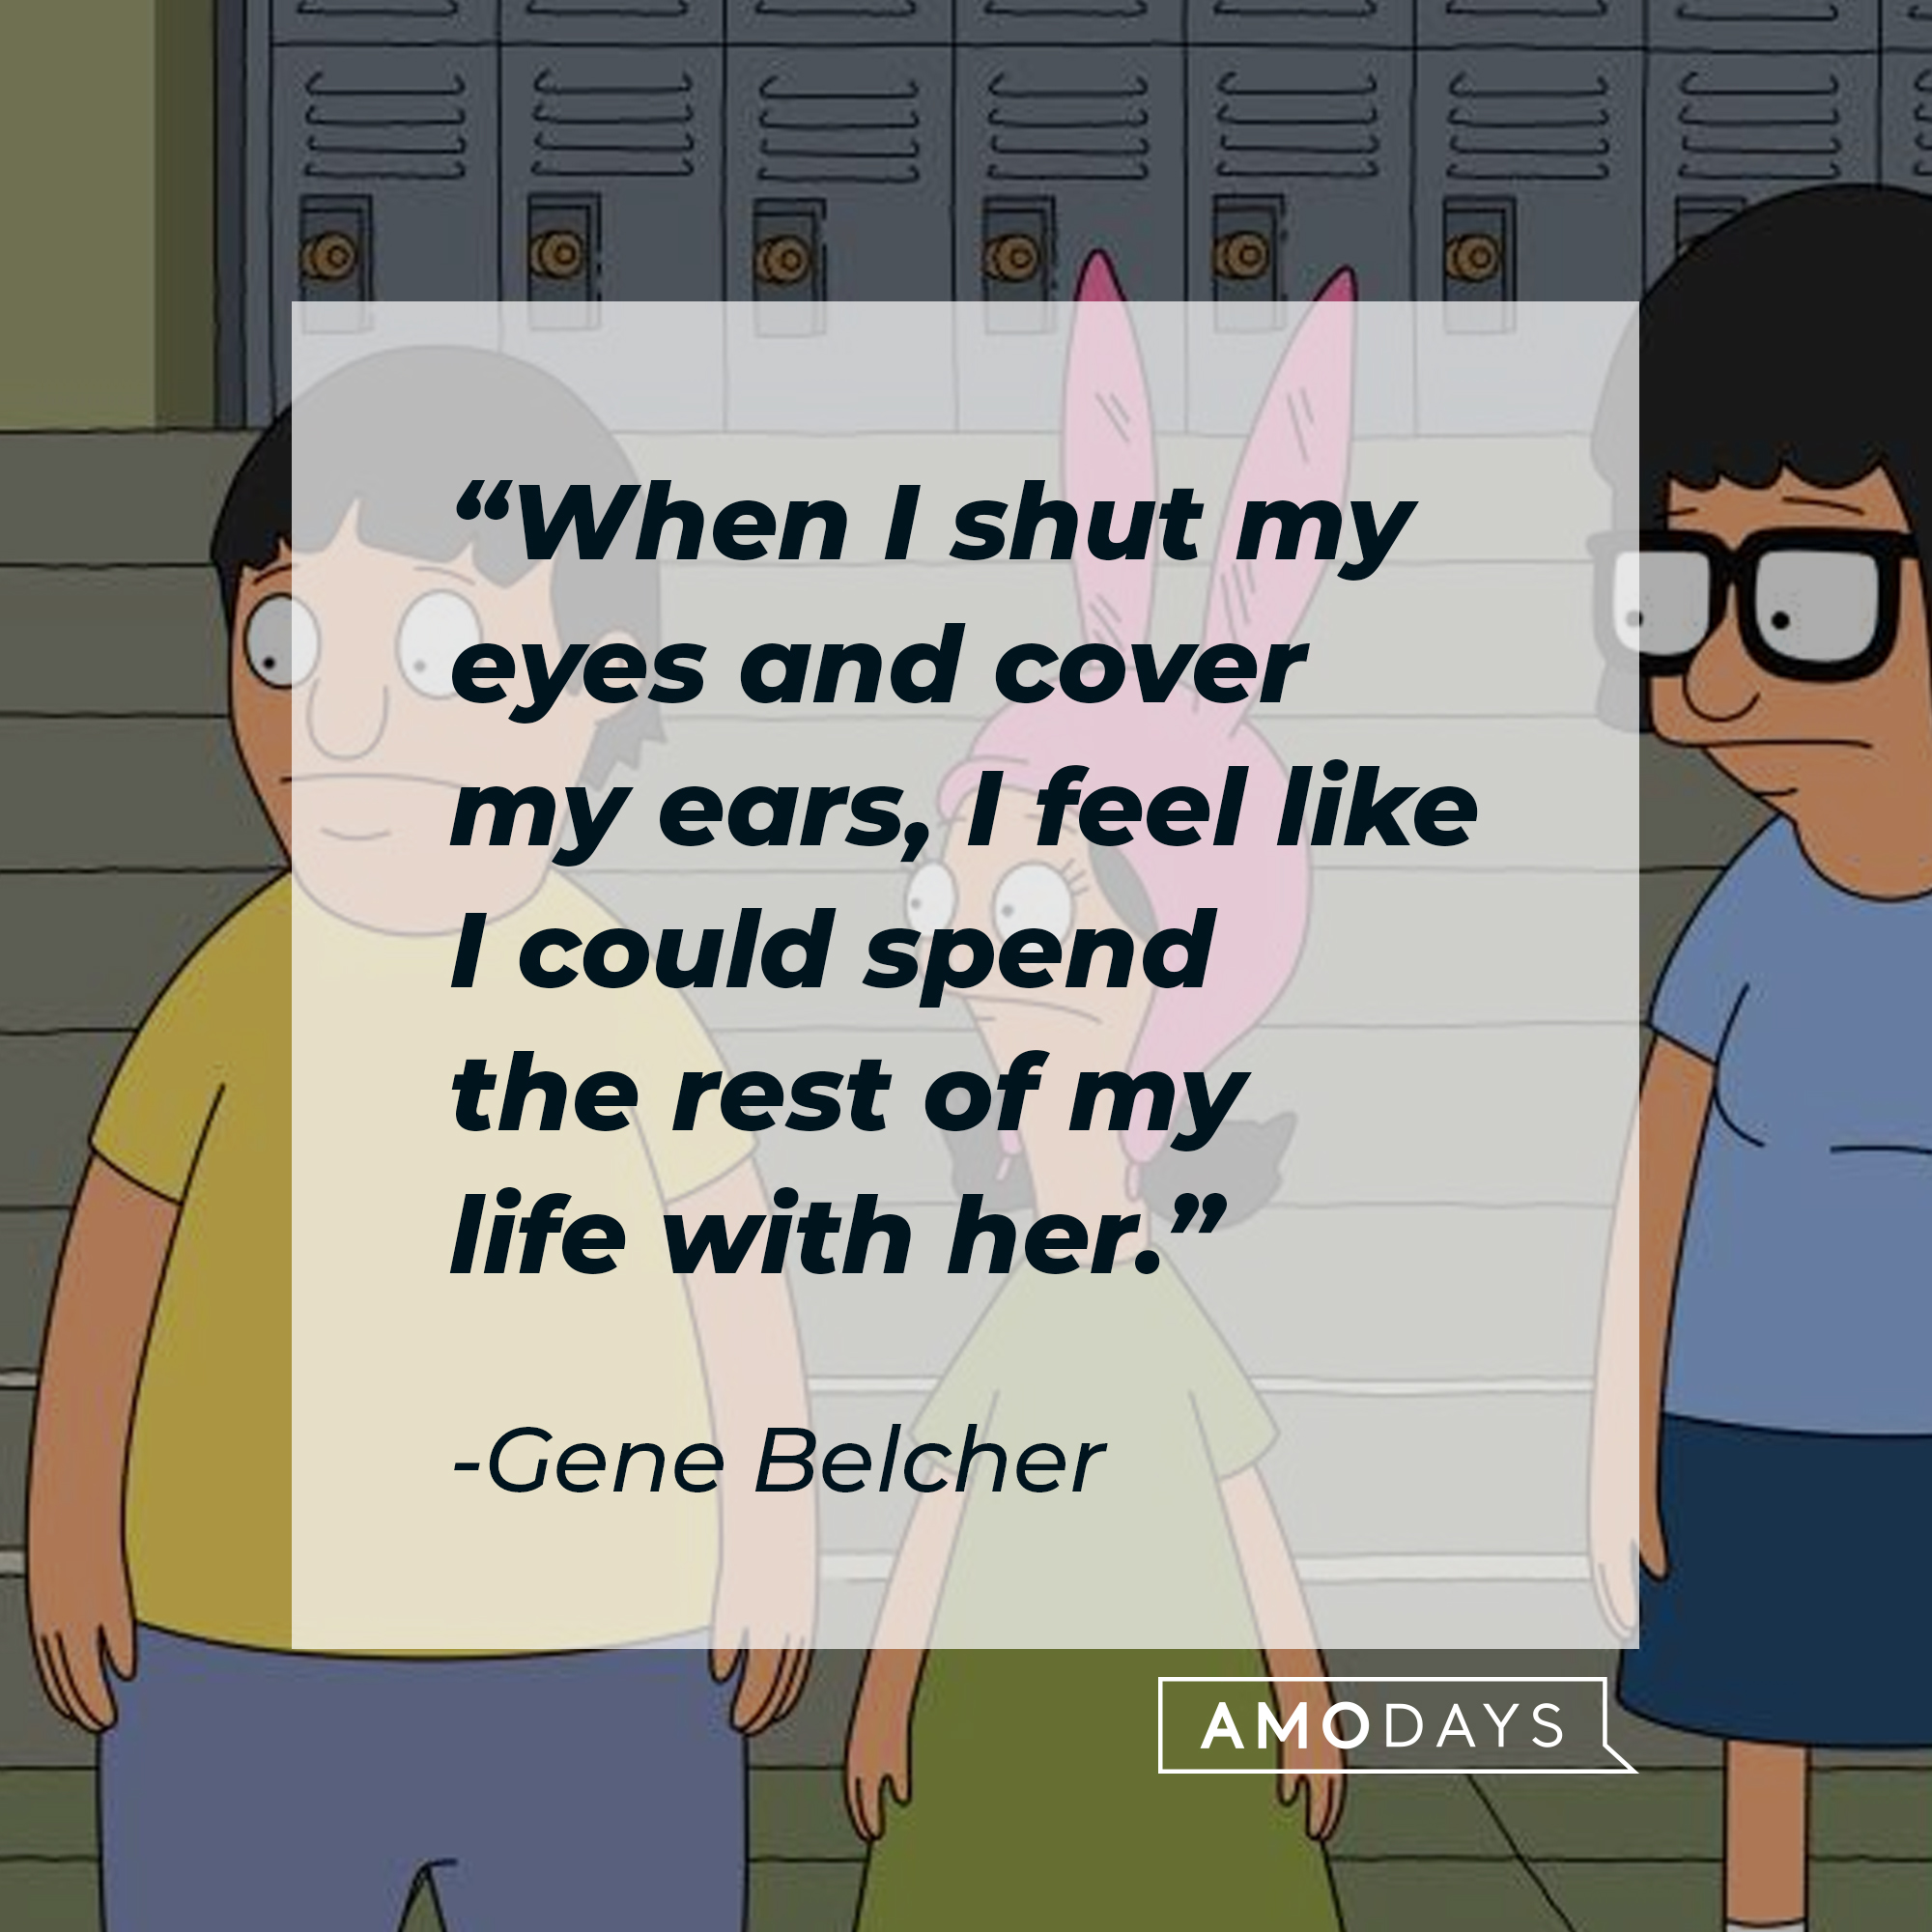 Characters from “Bob’s Burger’s” including Gene Belcher, with his quote: "When I shut my eyes and cover my ears, I feel like I could spend the rest of my life with her."  | Source: Facebook.com/BobsBurgers